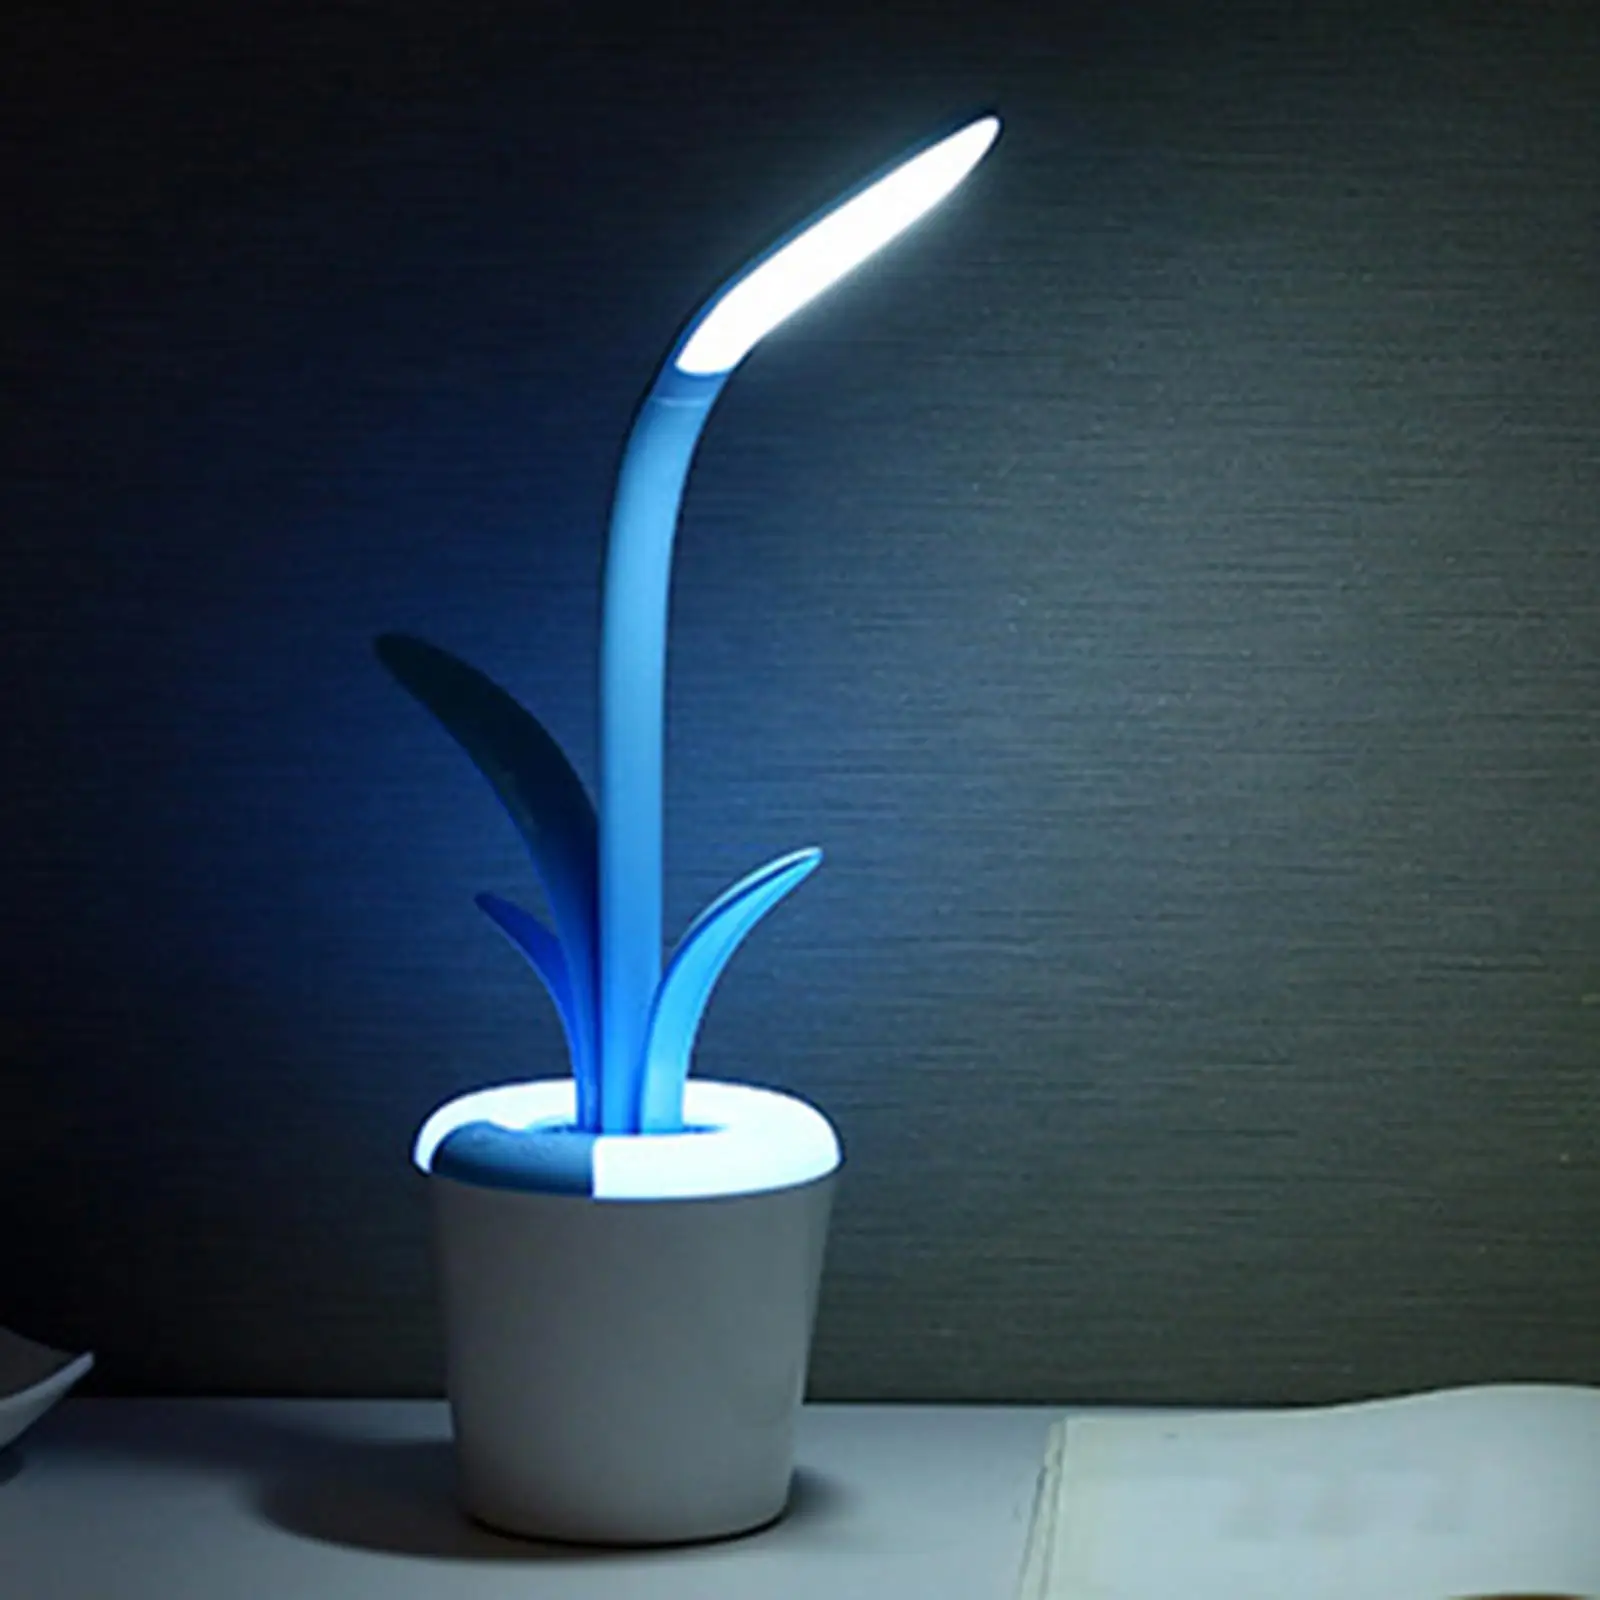 Clivia Shape LED Desk Lamp Nightstand Eye-Caring Rechargeable Table Light Decor Nightlight for Home Office Bedroom Dormitory